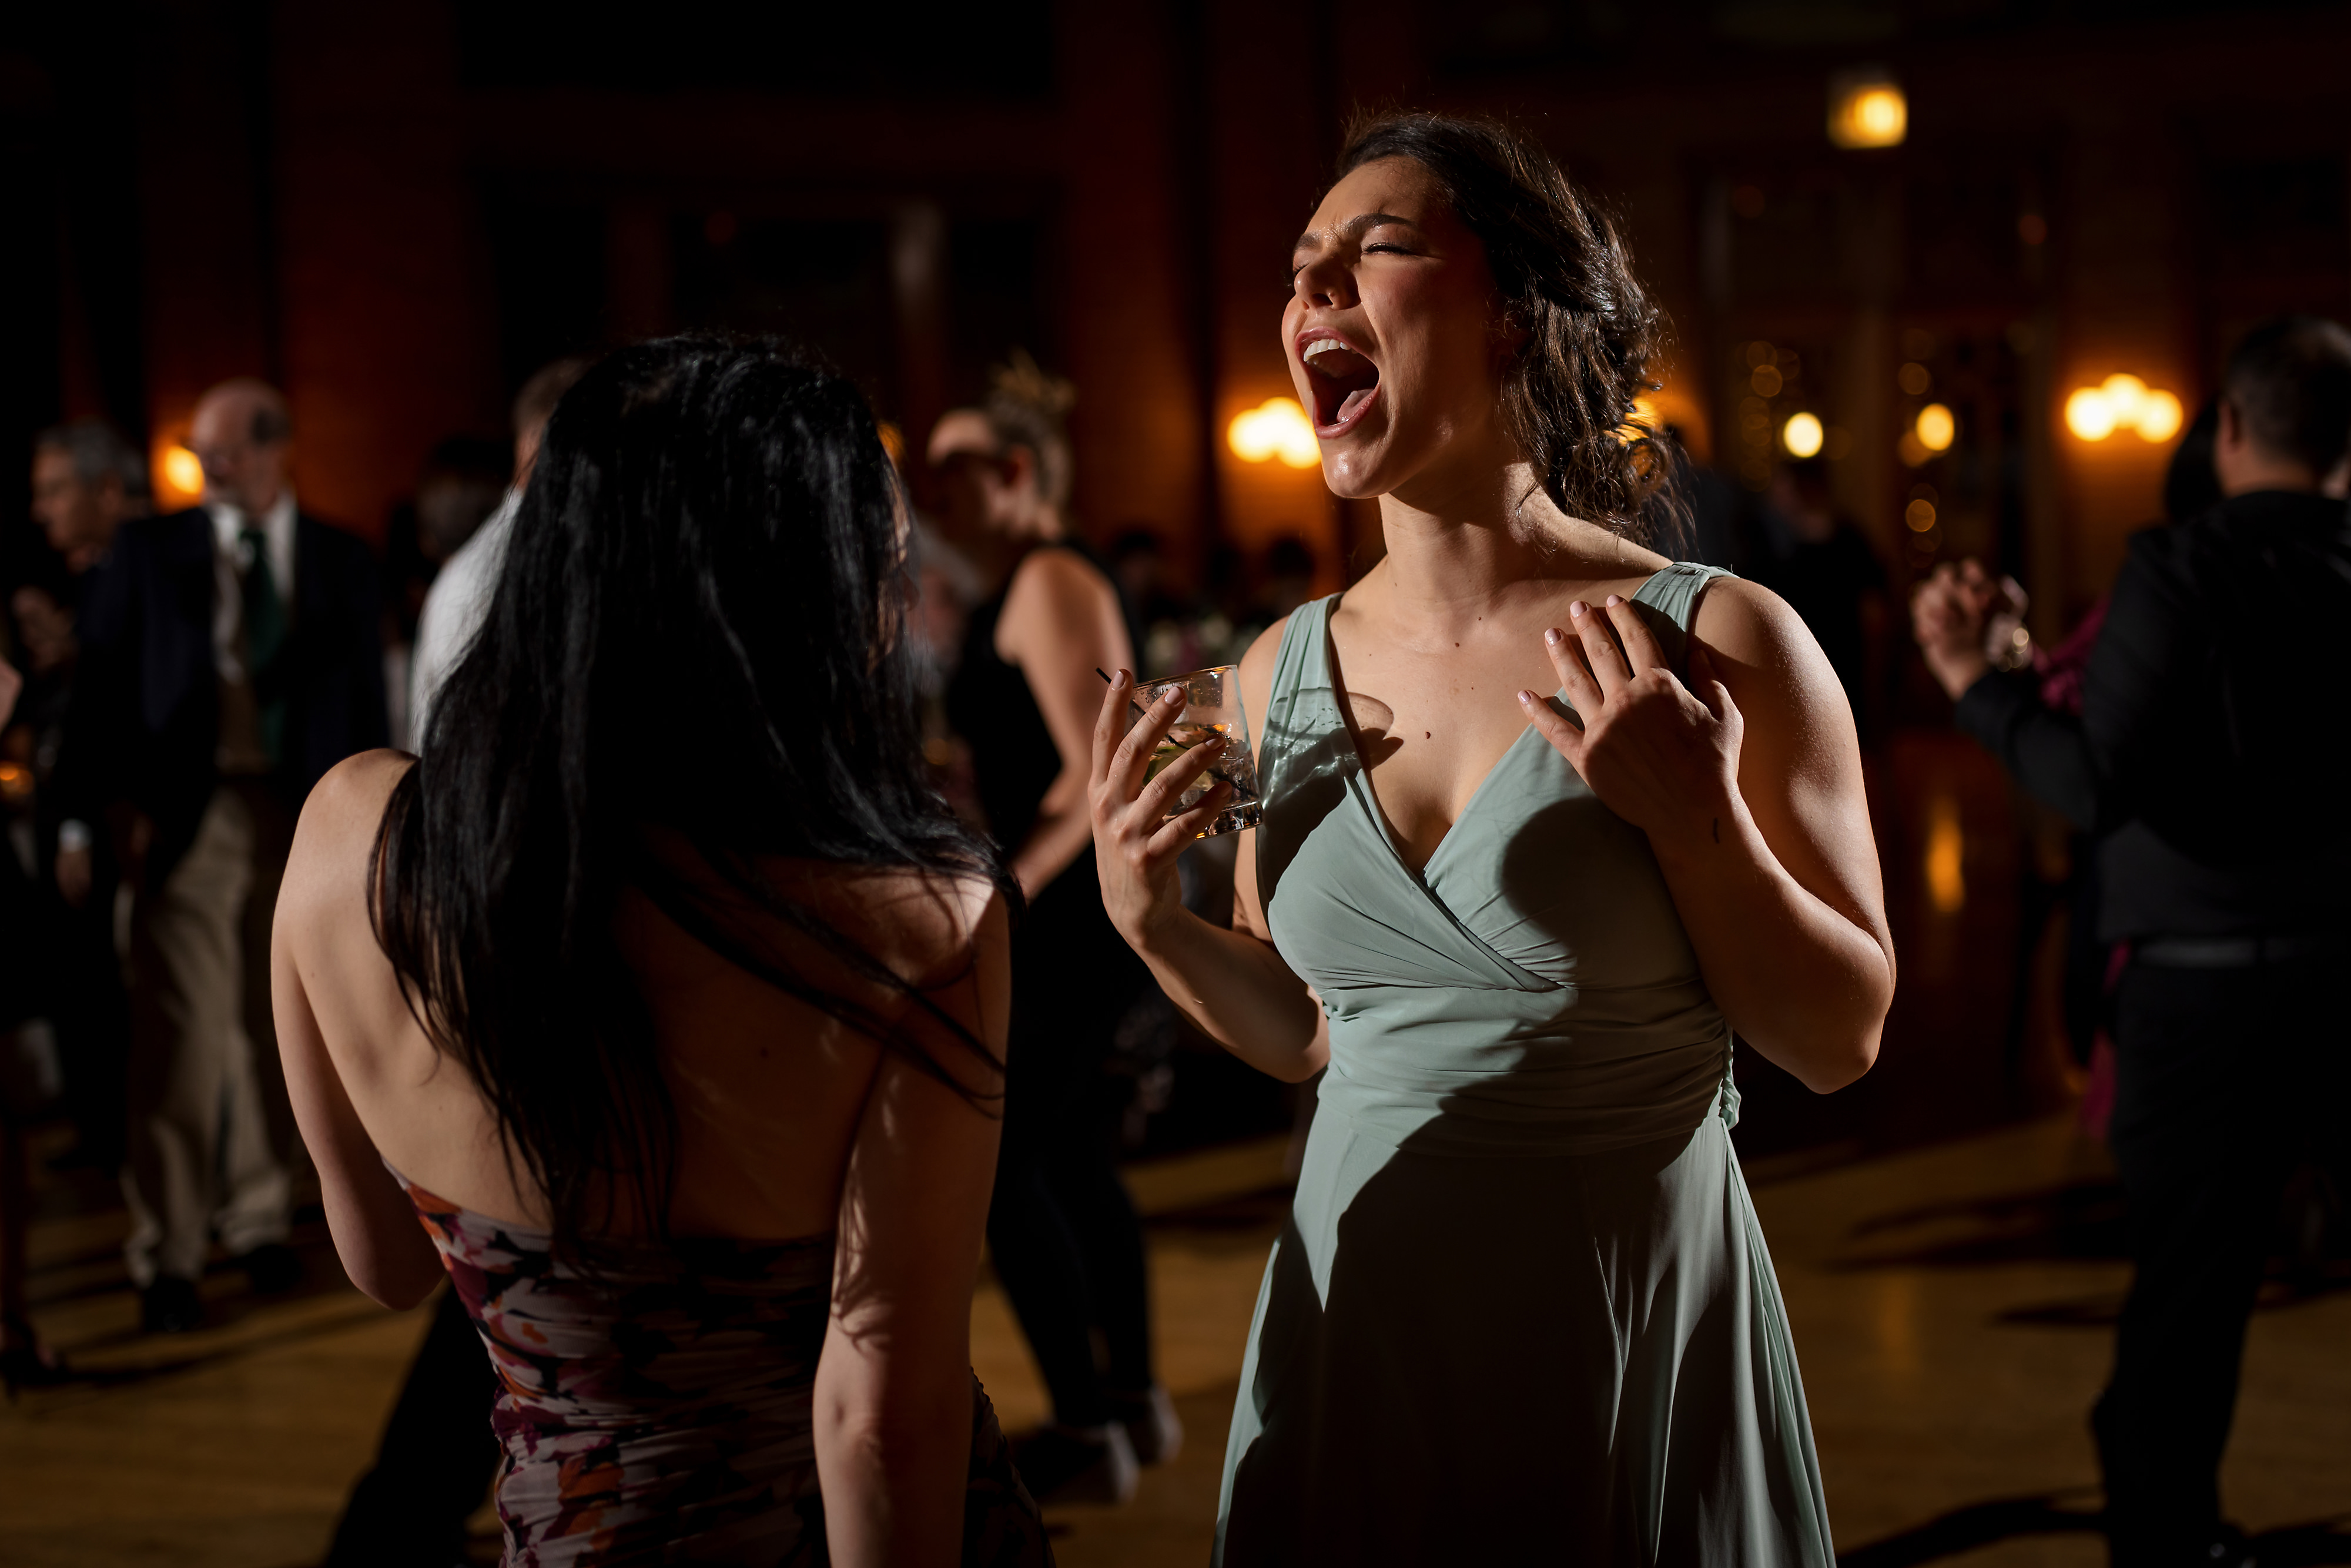 wedding guests dance during wedding reception at Cafe Brauer in Chicago's Lincoln Park neighborhood